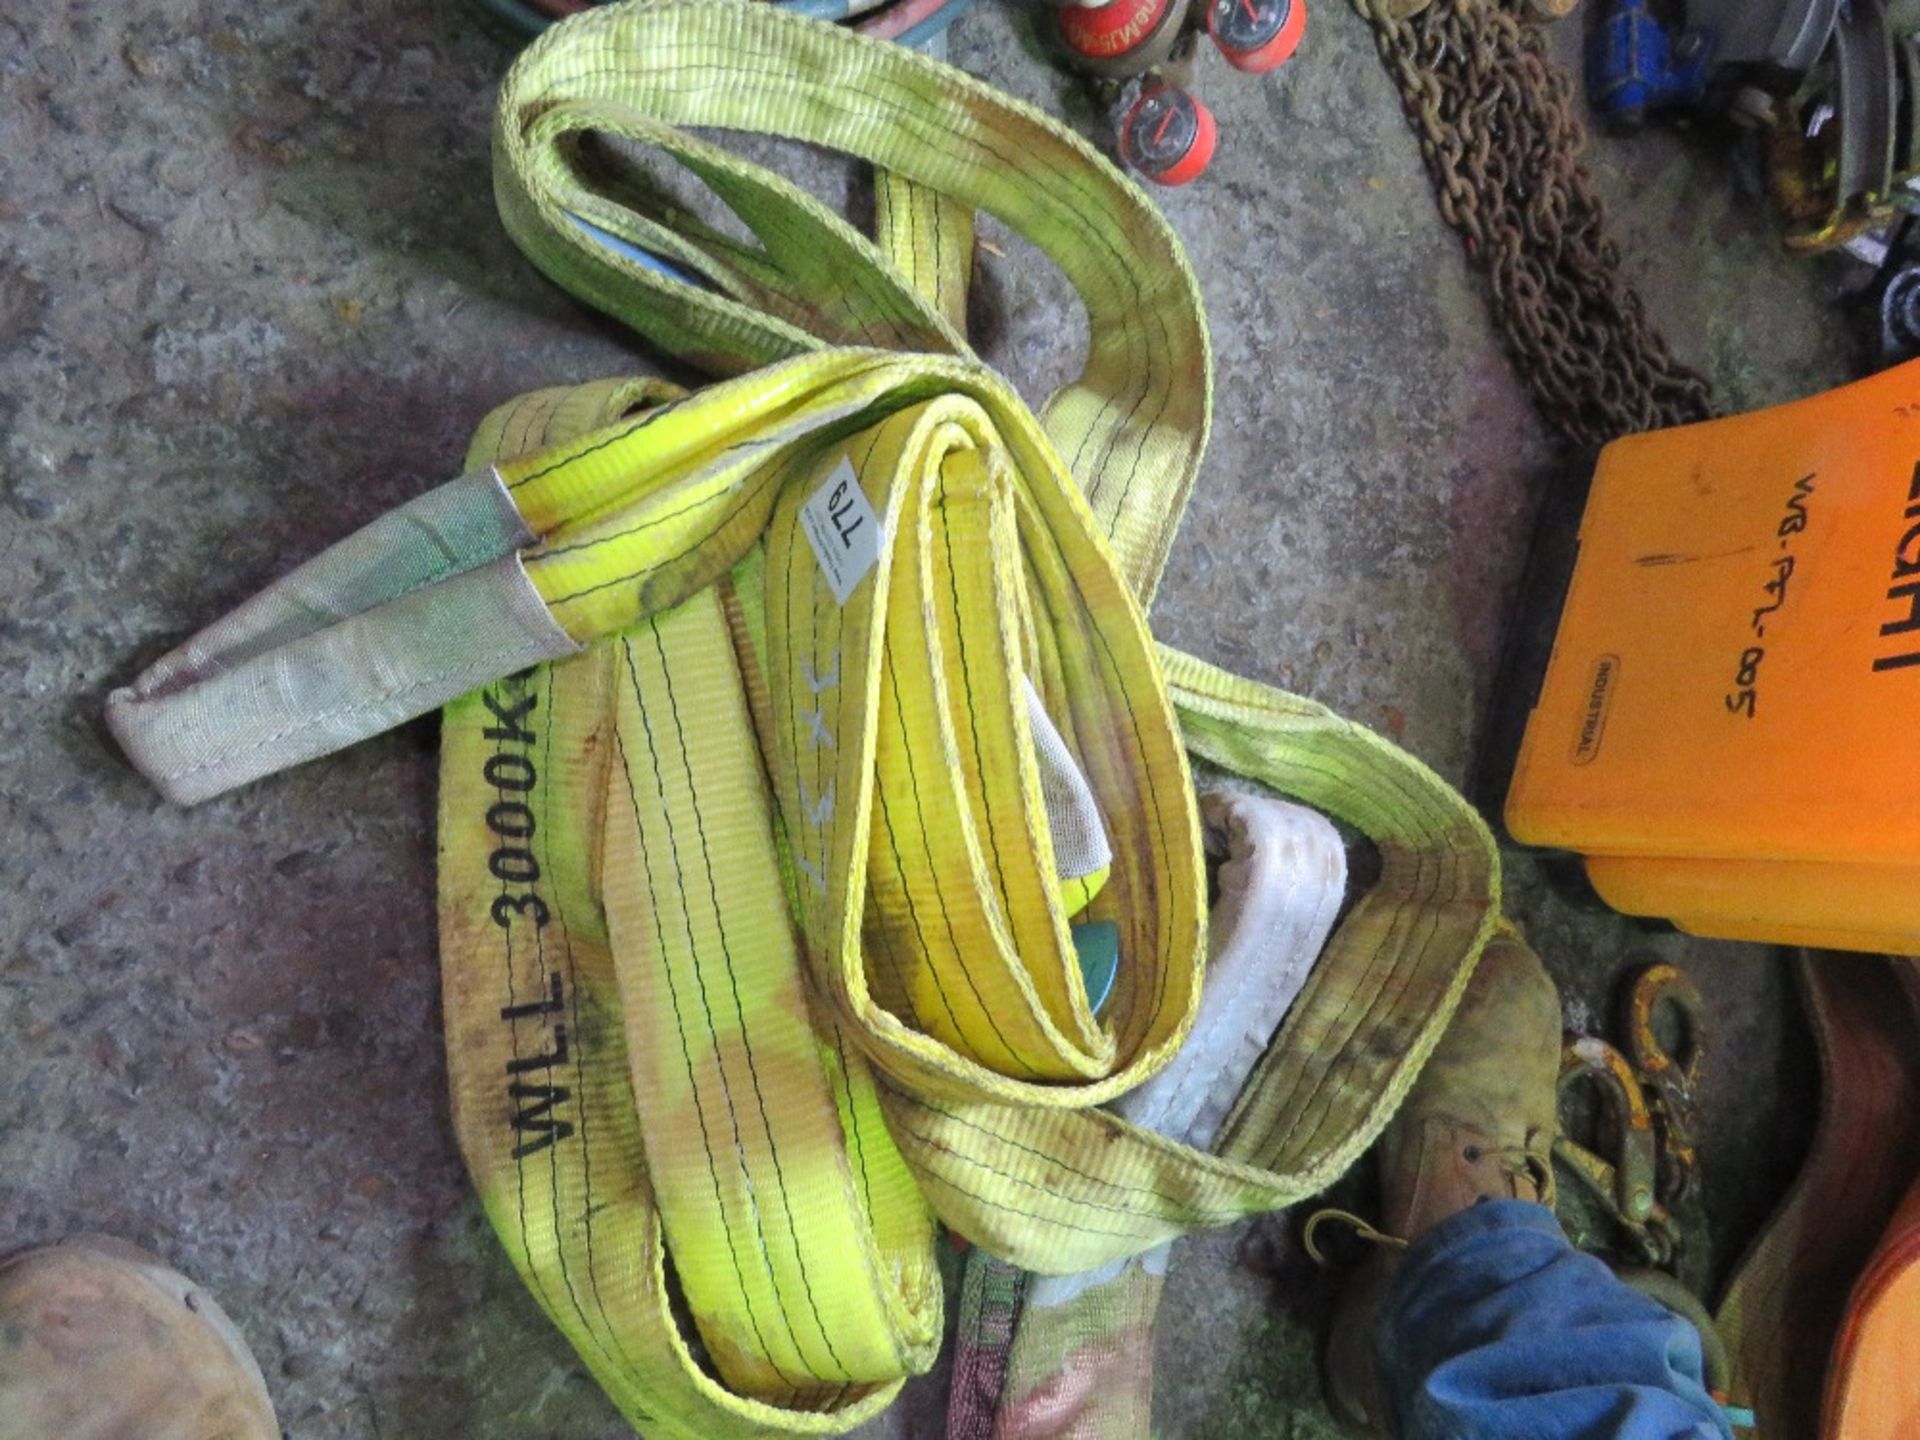 3 X 3 TONNE RATED LIFTING SLINGS. - Image 2 of 2